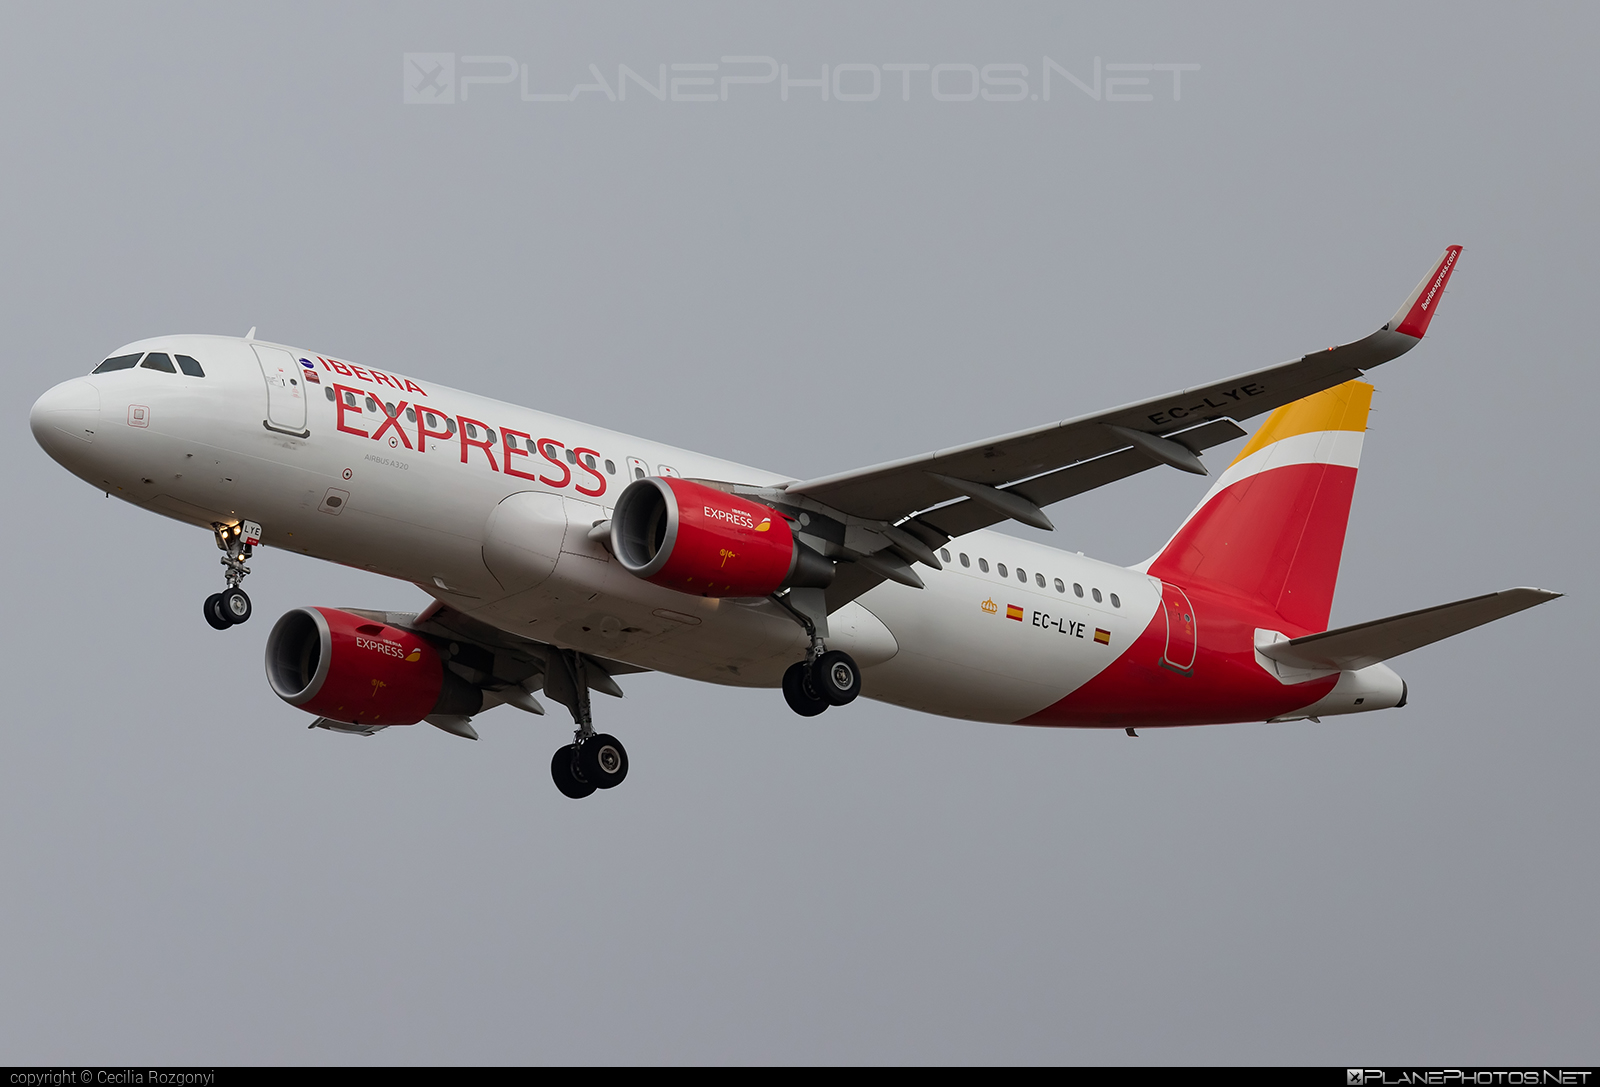 Airbus A320-216 - EC-LYE operated by Iberia Express #a320 #a320family #airbus #airbus320 #iberia #iberiaexpress